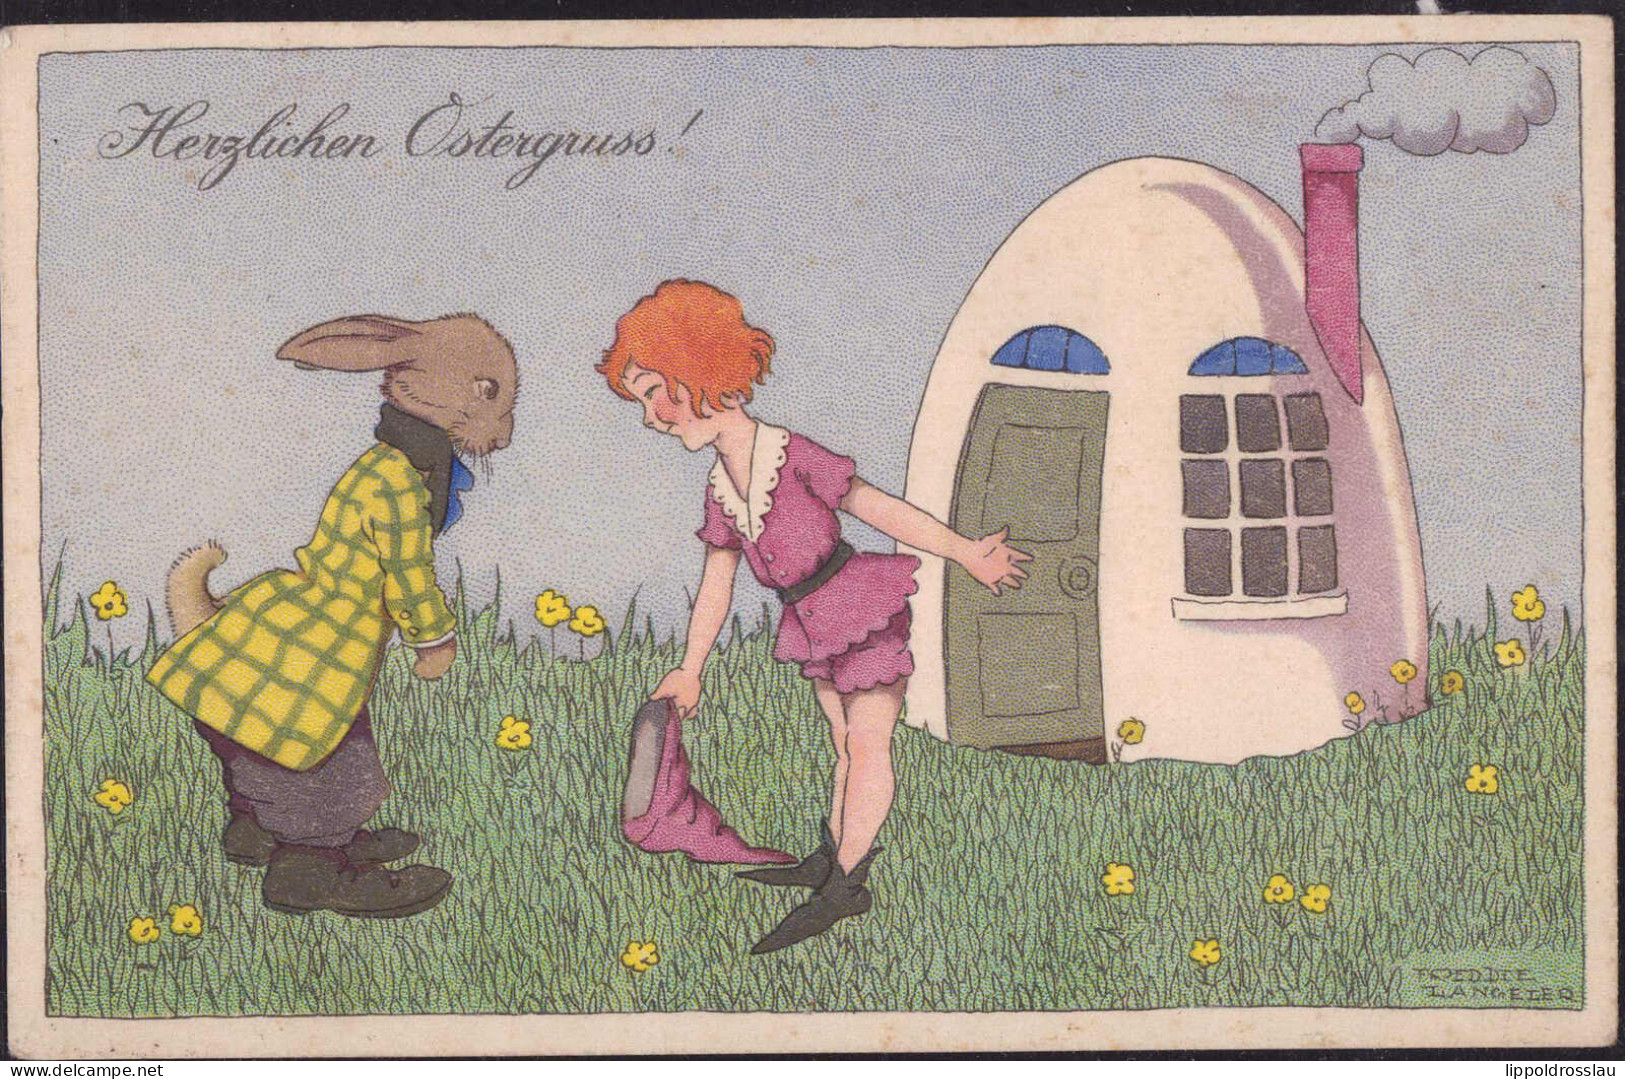 Gest. Ostern Hase Sign. Langeler M&B 2614 1927 - Other & Unclassified